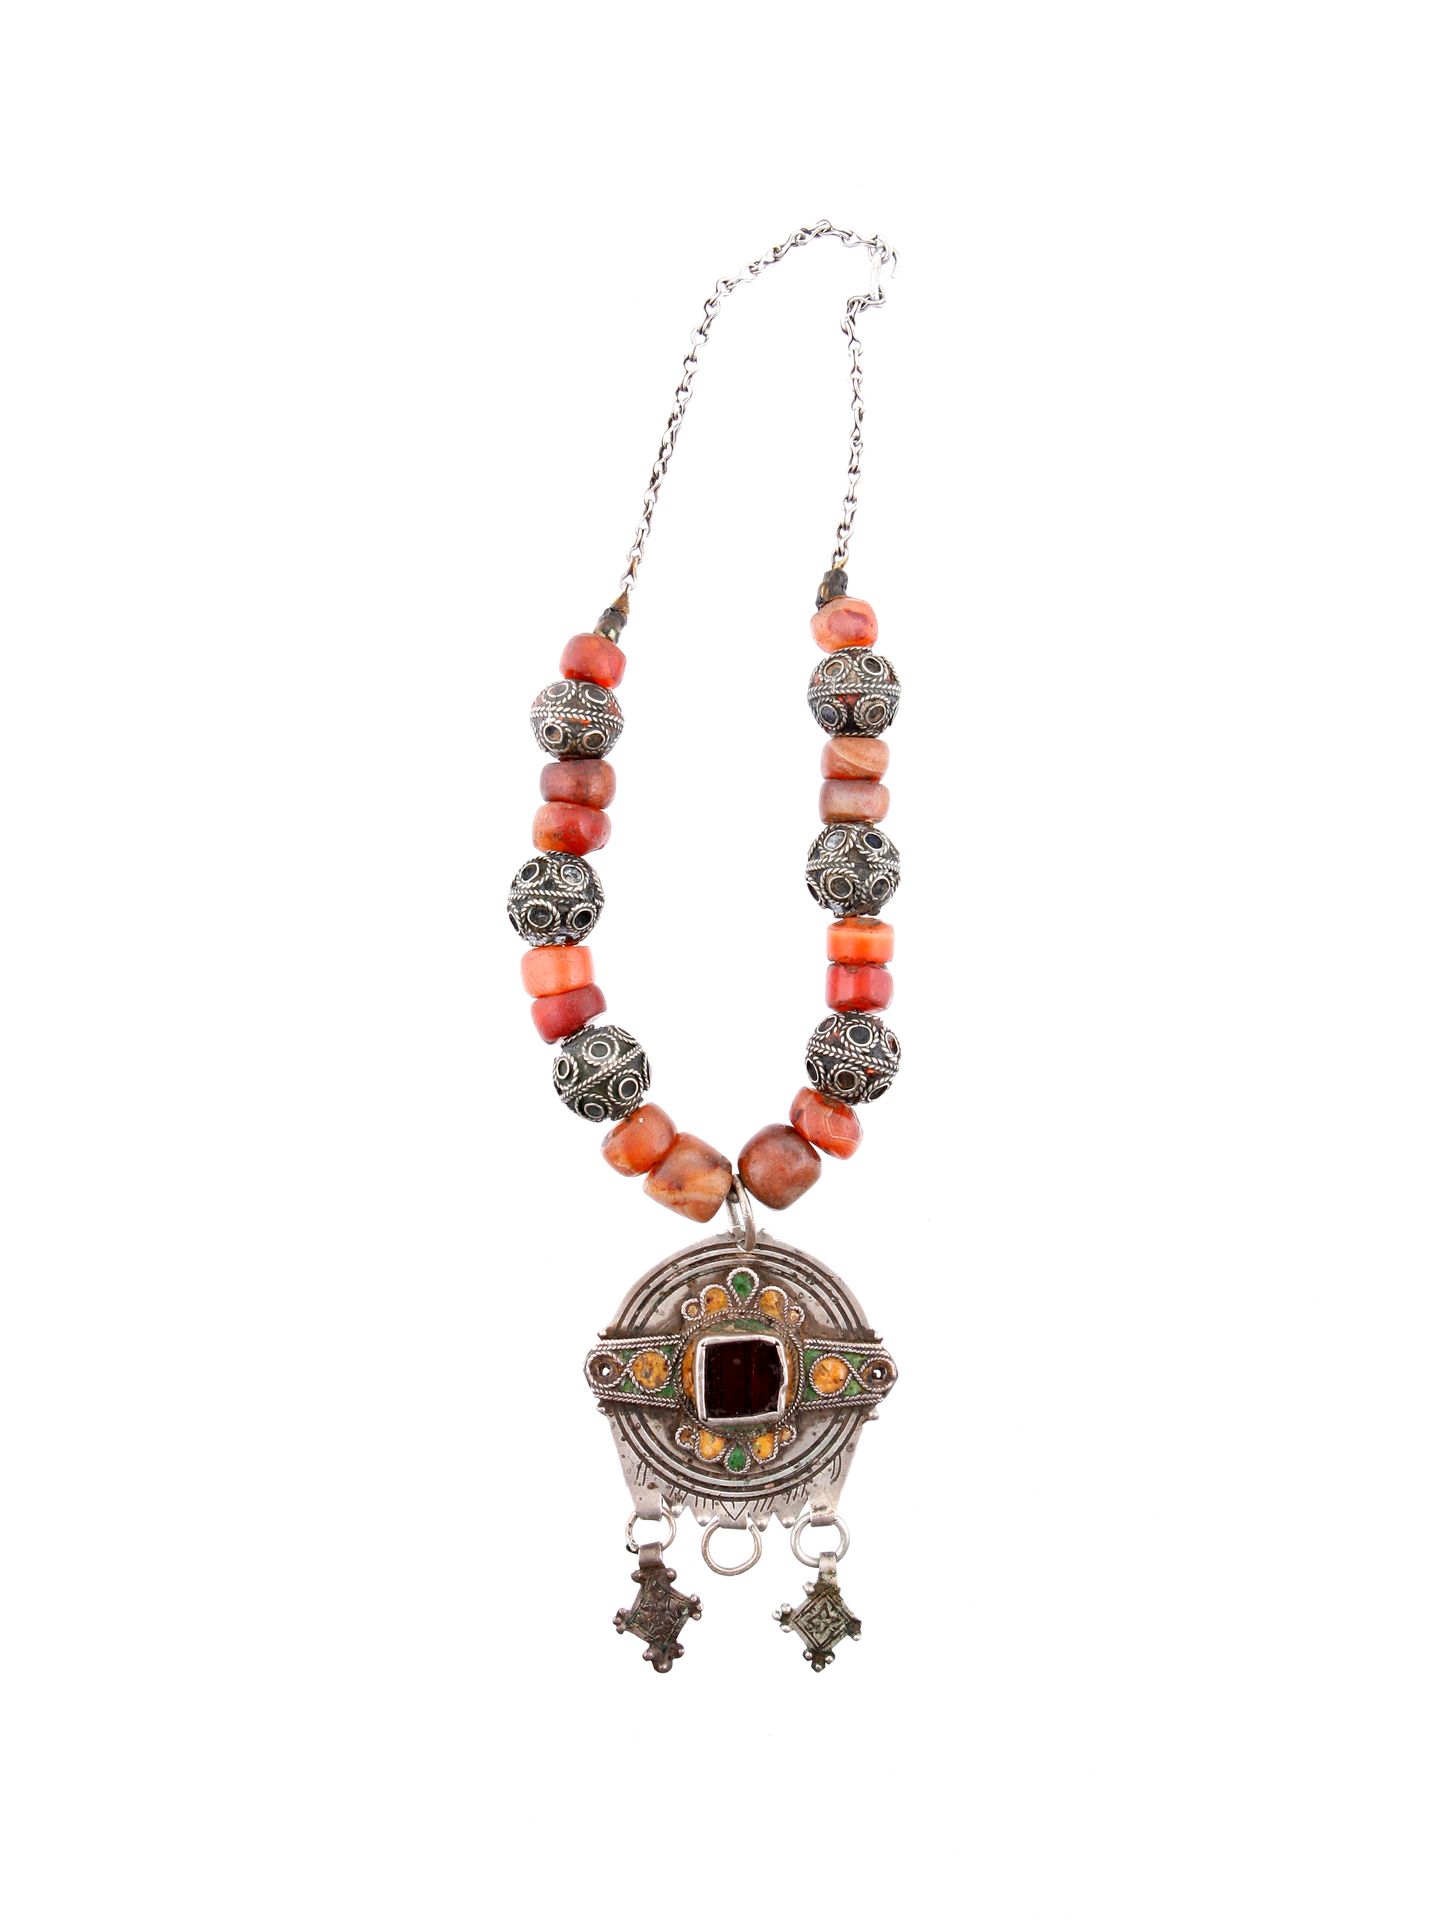 A Berber Necklace with a central Pendant Necklace with central jewelry pendant

&hellip;